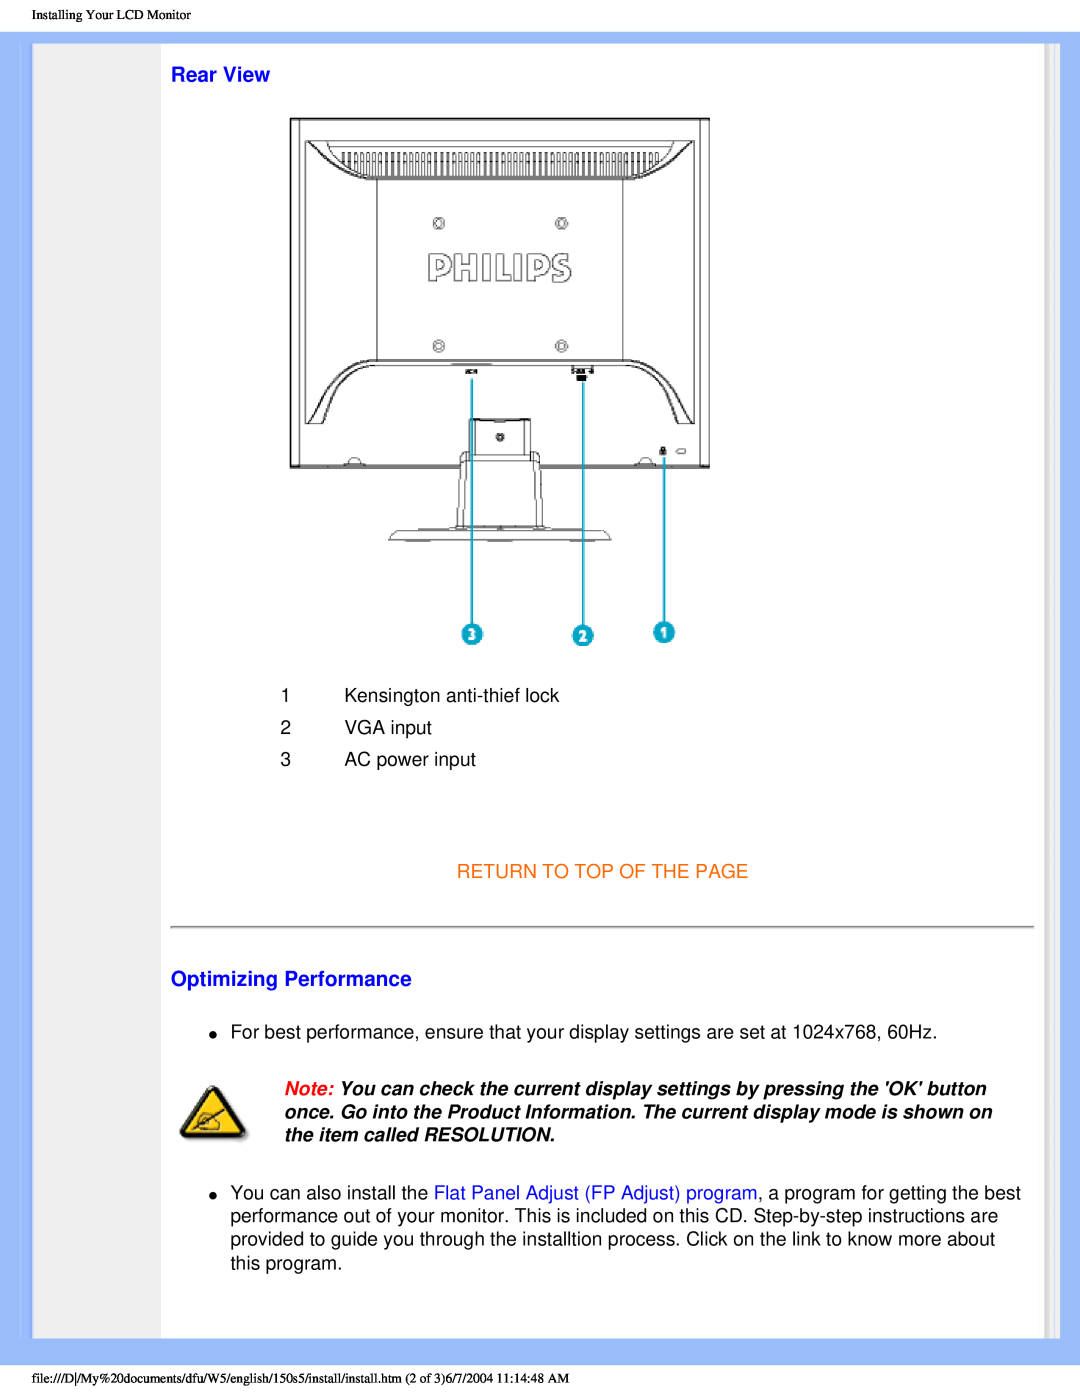 Philips 150S5FS user manual Rear View, Optimizing Performance, Return To Top Of The Page 